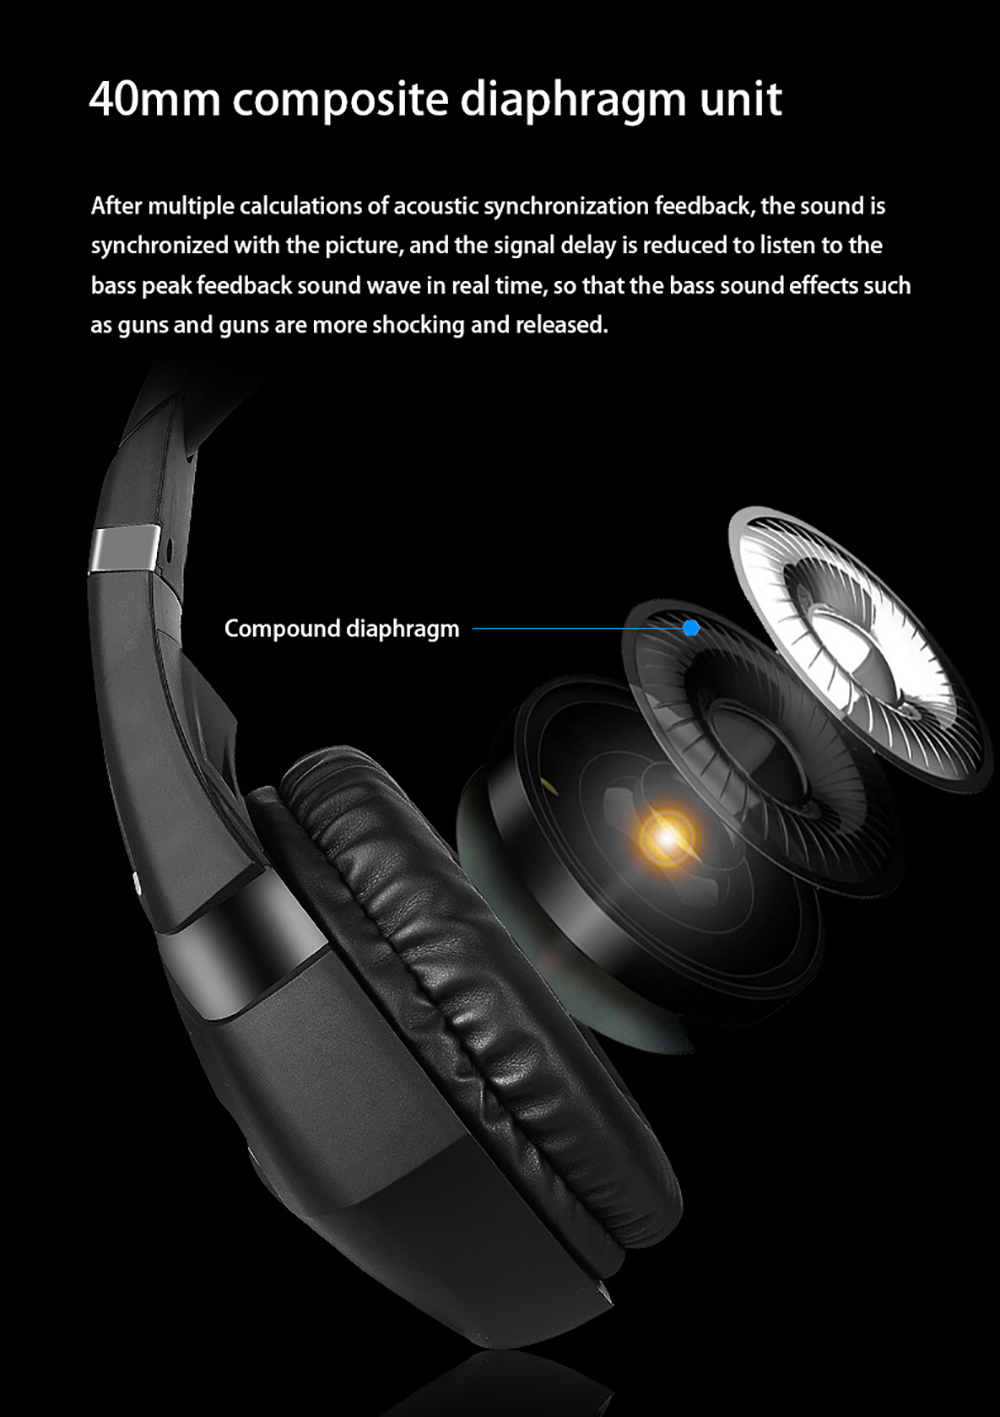 A2-Gaming-Headset-LED-Noise-Reduction-Omnidirectional-HD-Microphone-40mm-Unit-35mm-Audio-PlugUSB-Lin-1829494-1